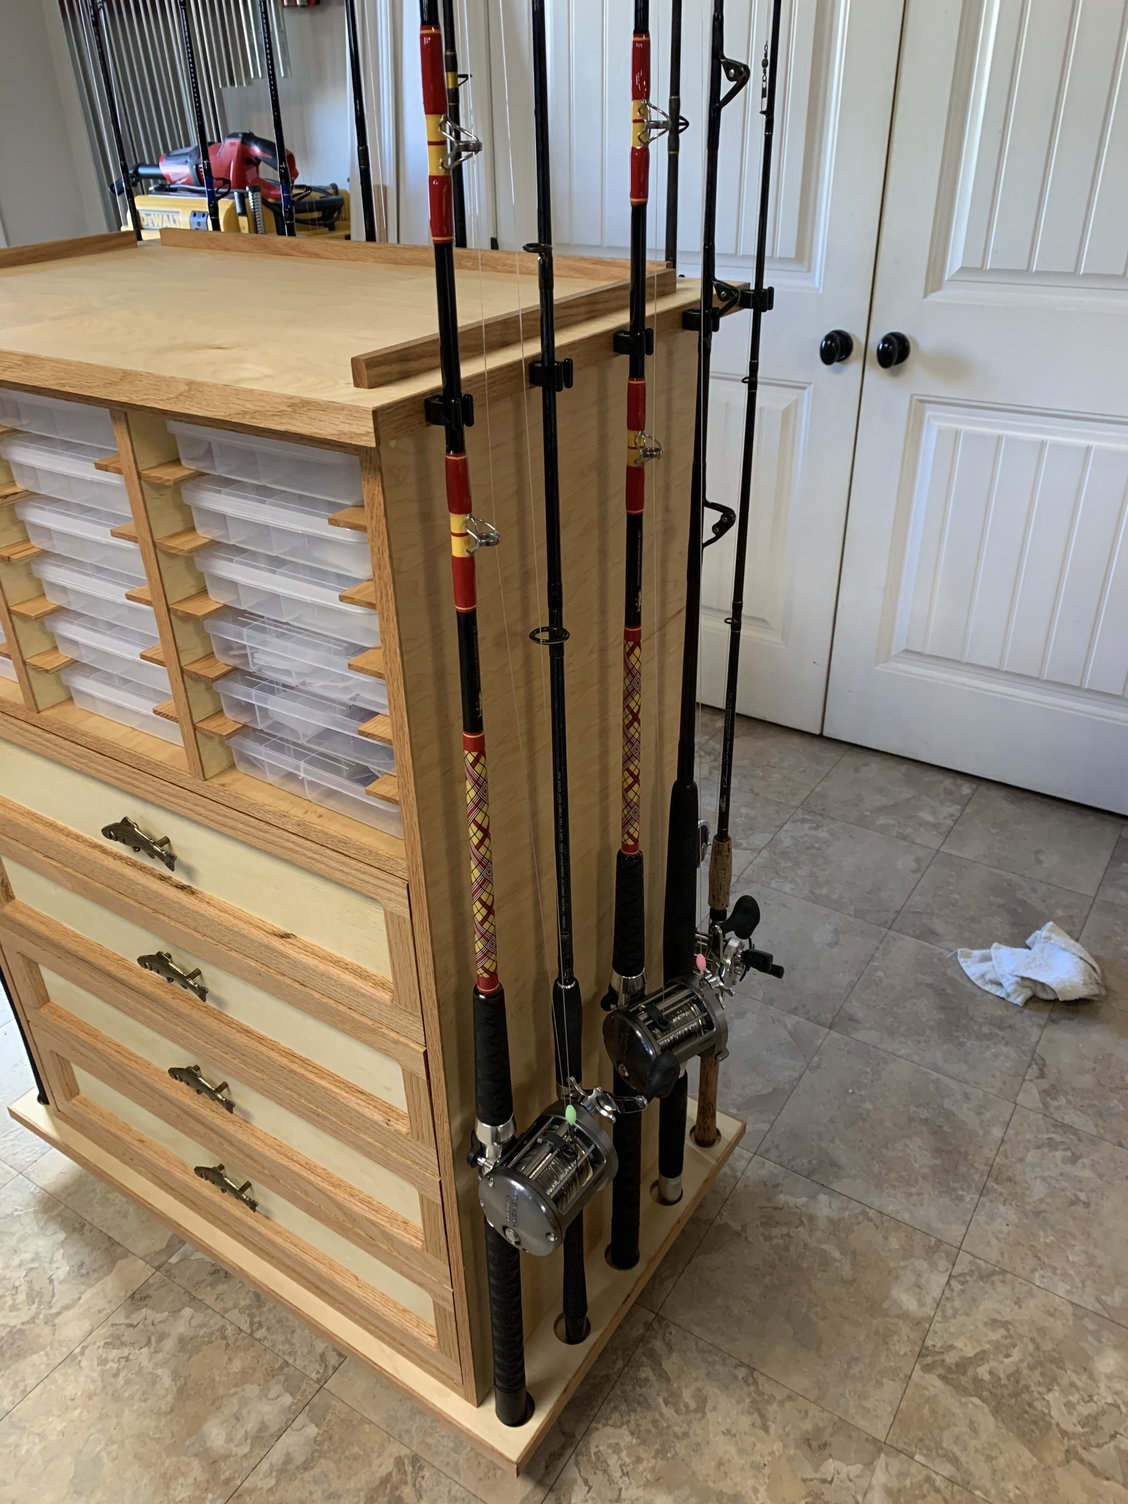 Wooden Rod Rack Ideas - Page 2 - The Hull Truth - Boating and